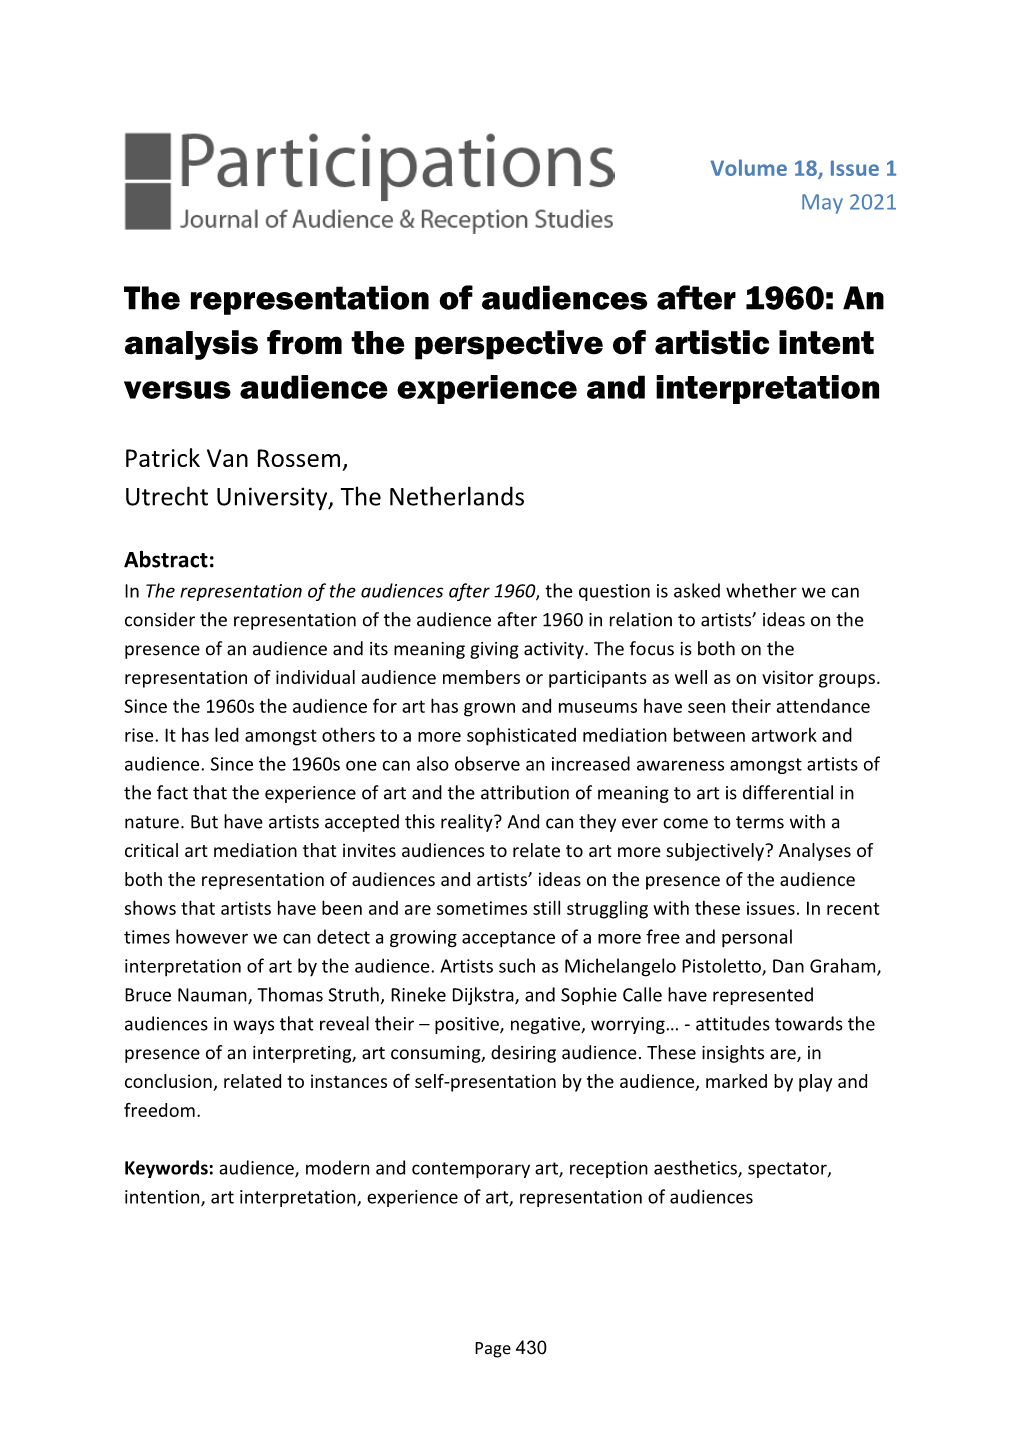 An Analysis from the Perspective of Artistic Intent Versus Audience Experience and Interpretation